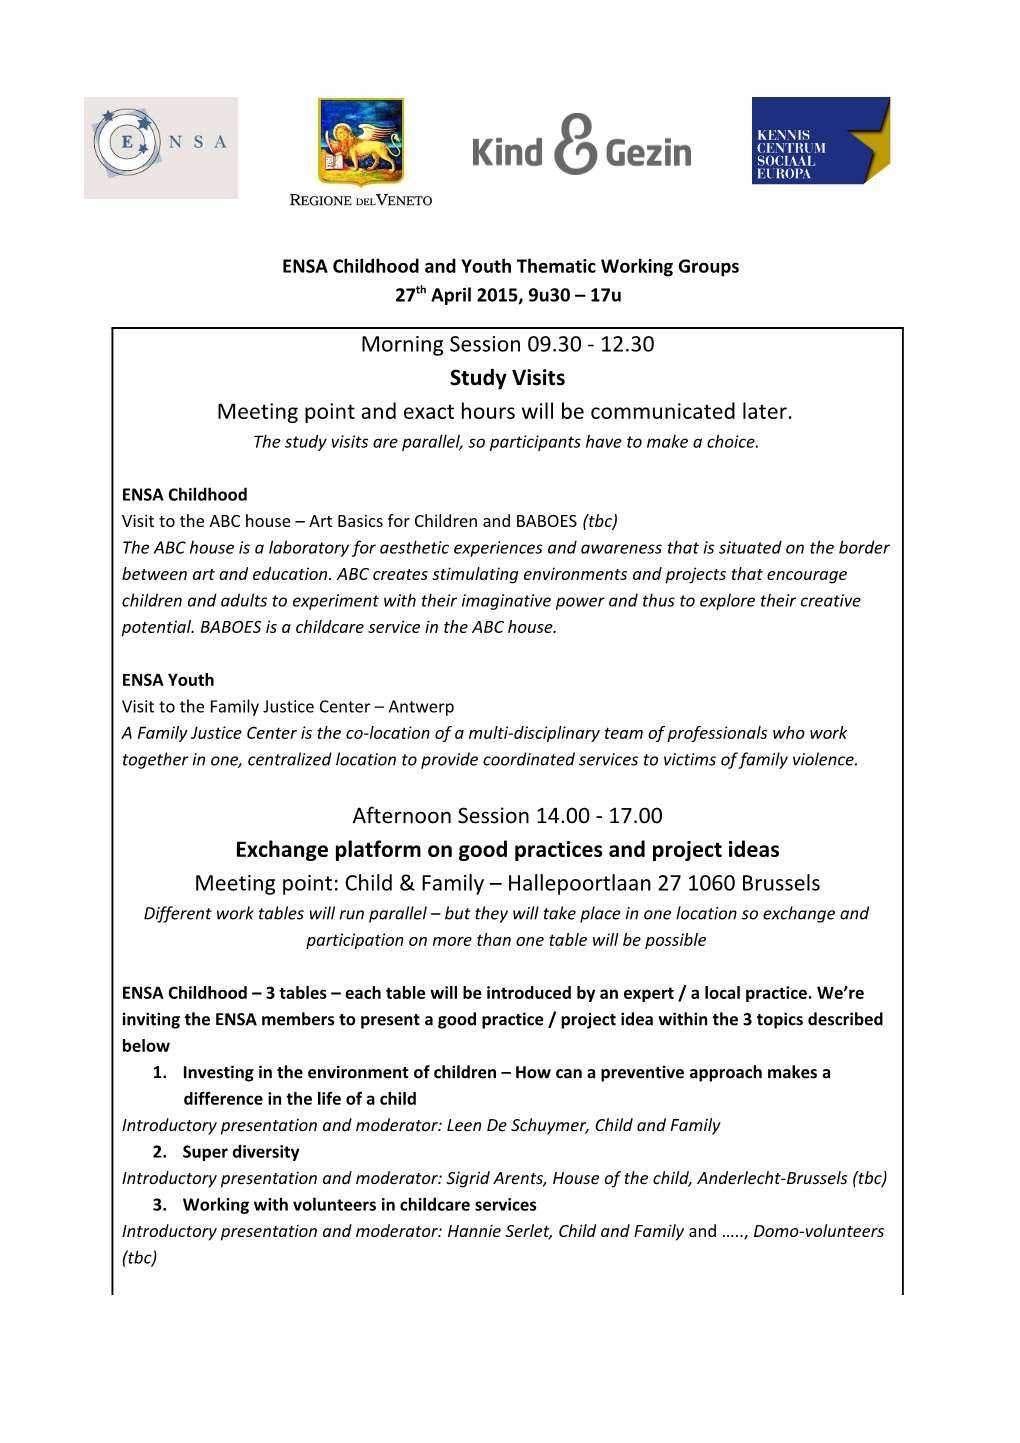 ENSA Childhood and Youth Thematic Working Groups 27Th April2015, 9U30 17U